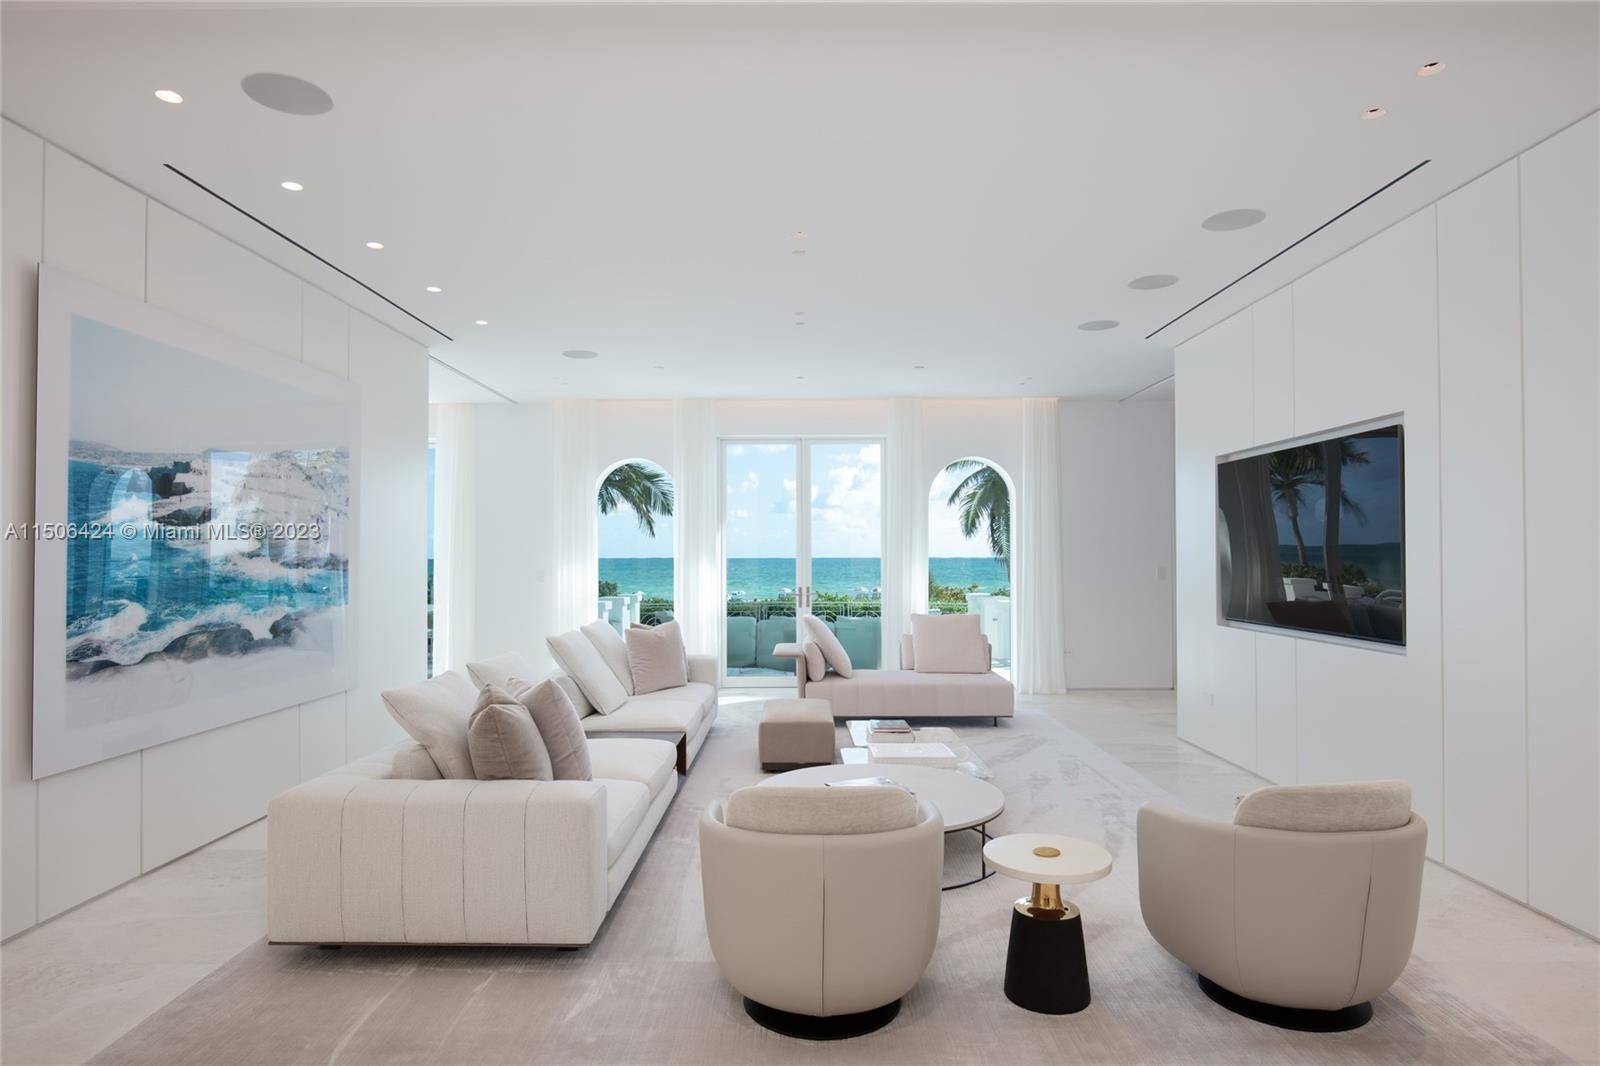 Introducing Villa 3005 at The Bath Club, a turnkey, completely renovated, furnished oceanfront retreat boasting unobstructed ocean views from its 3 main living levels.